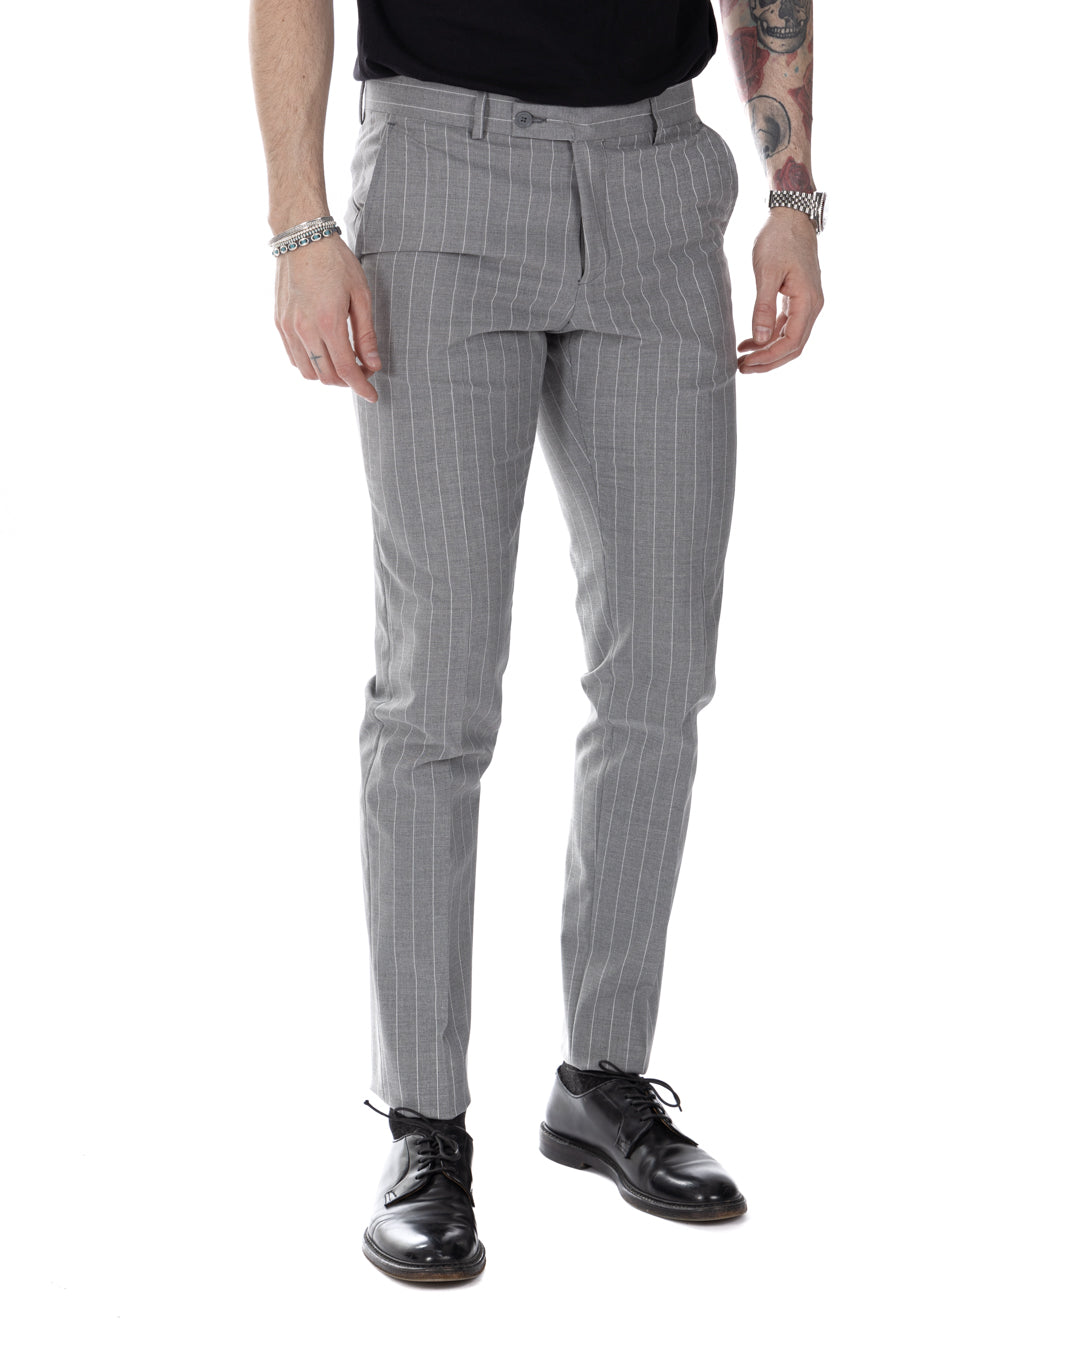 Vienna - gray striped double-breasted suit